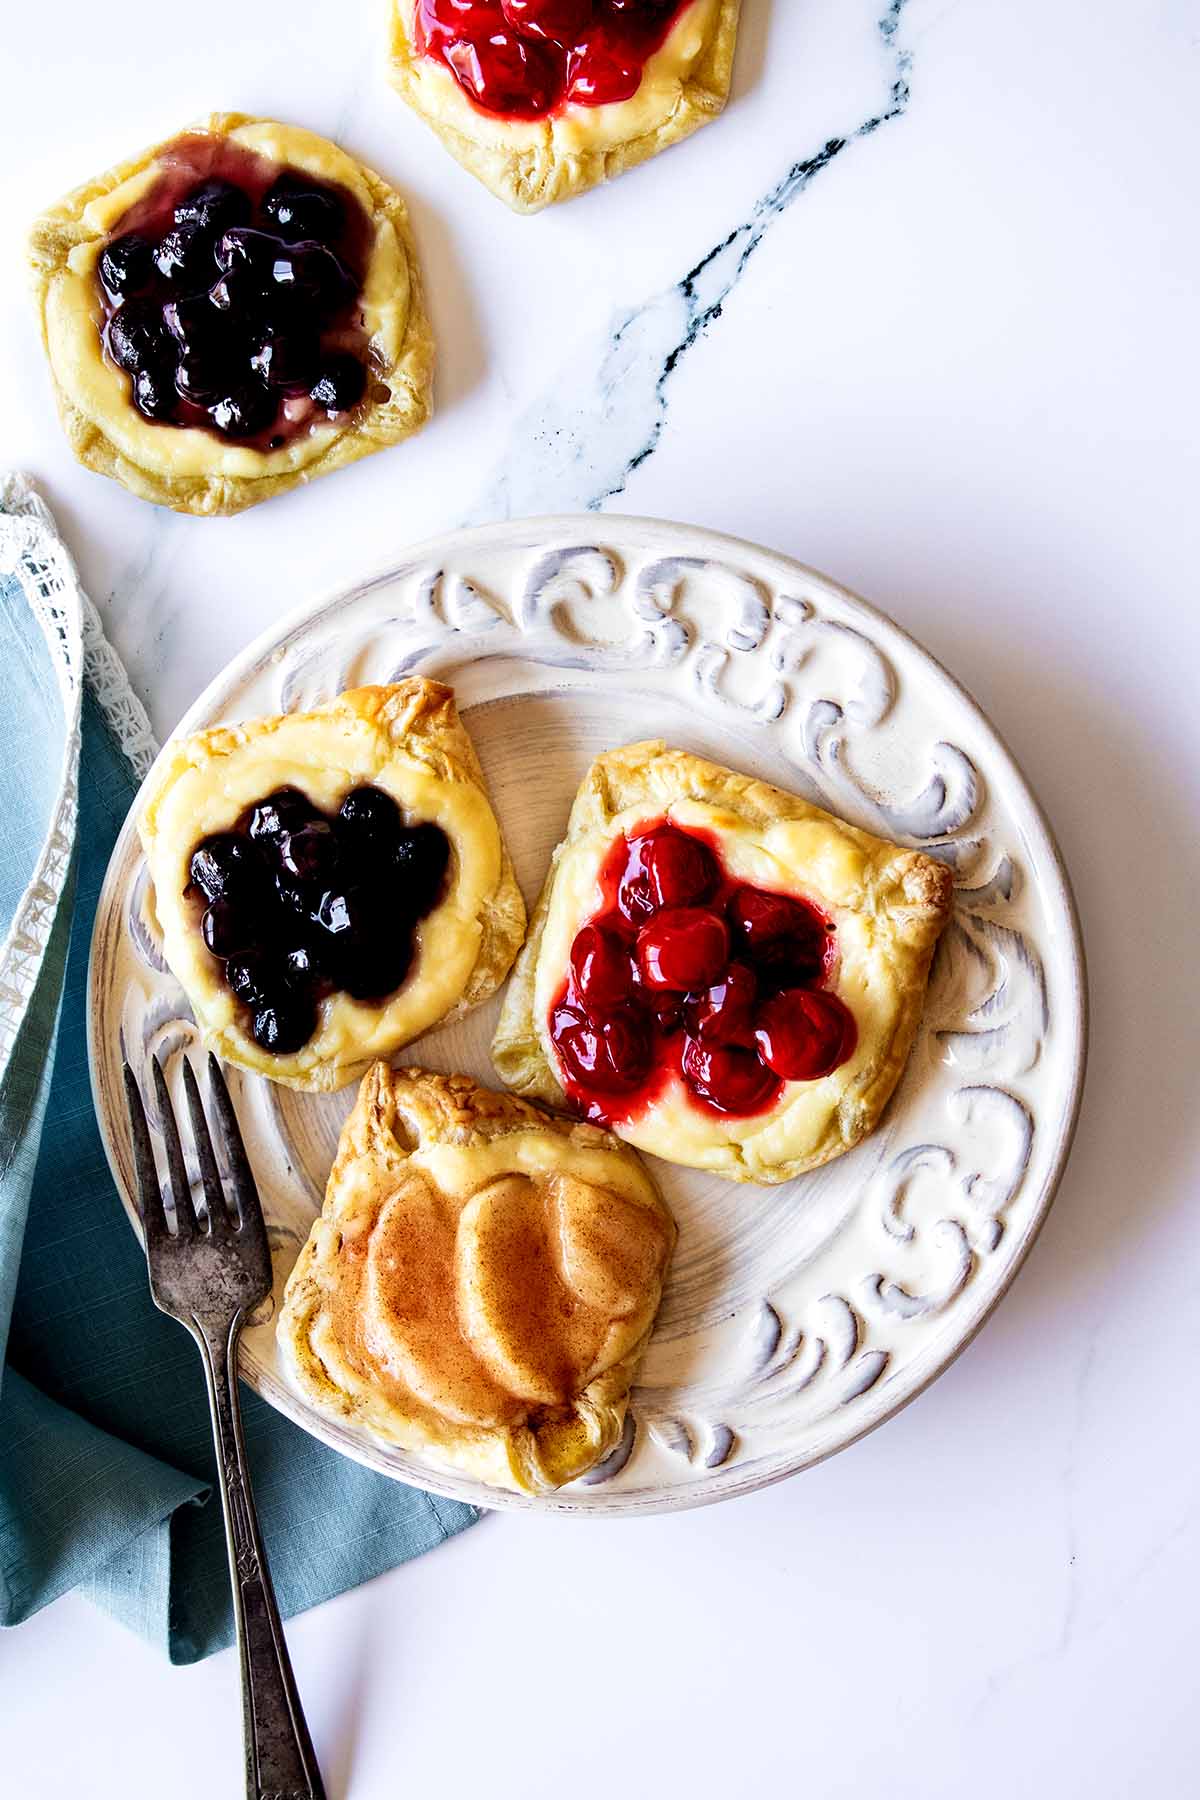 Overhead view of breakfast pastries on a white plate with a fork and blue napkin